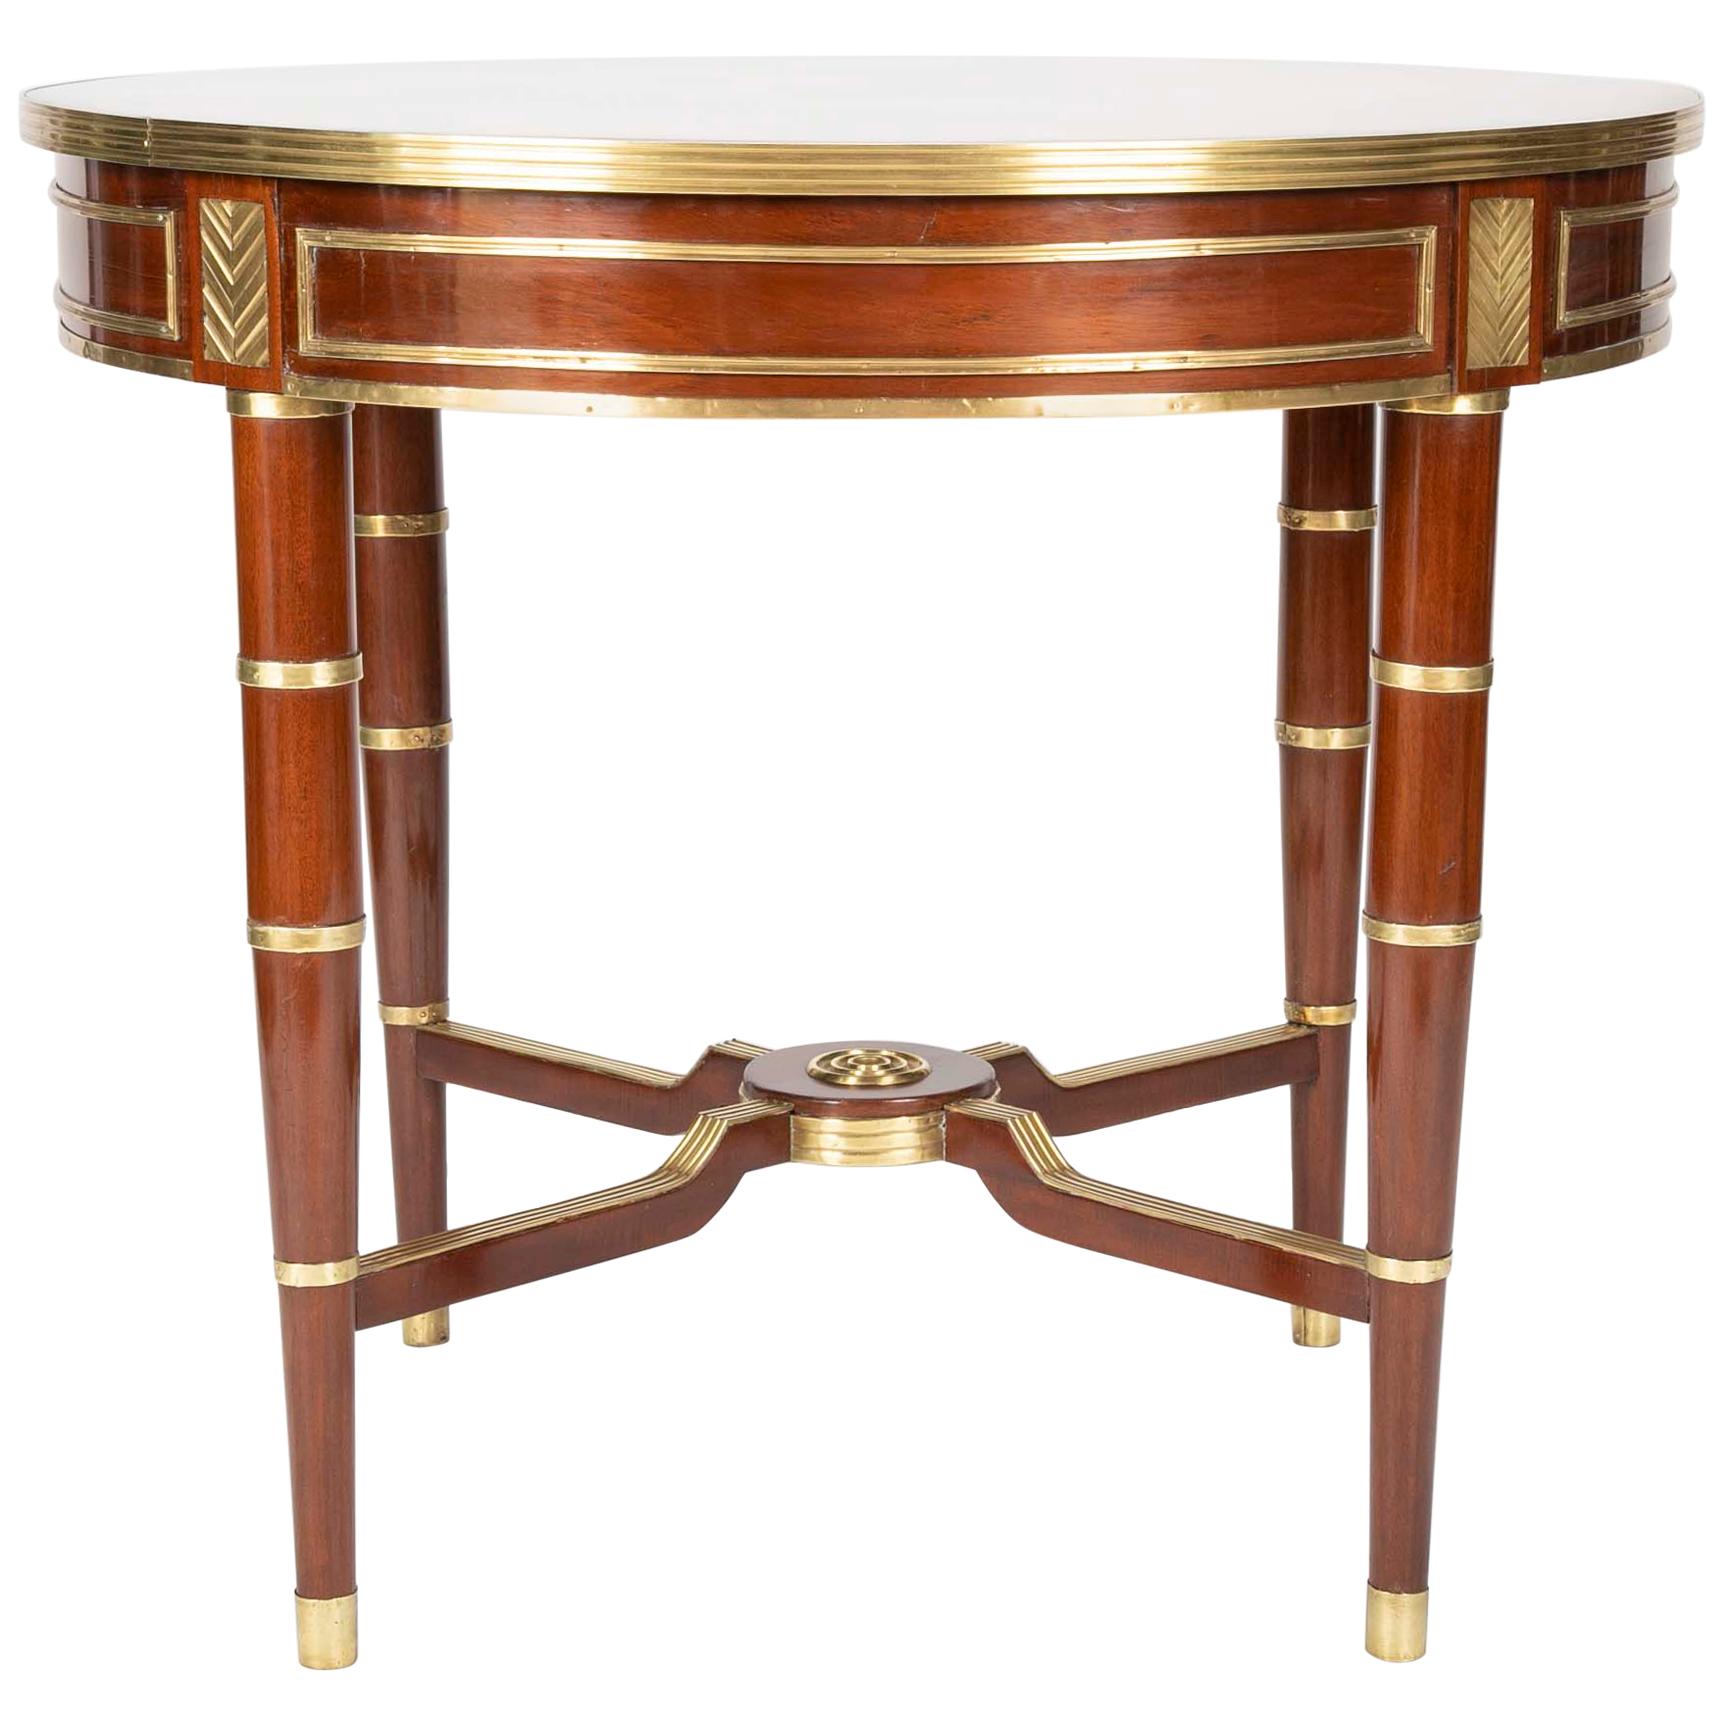 Baltic, Possibly Russian Neoclassic Mahogany Centre Table with Brass Mounts